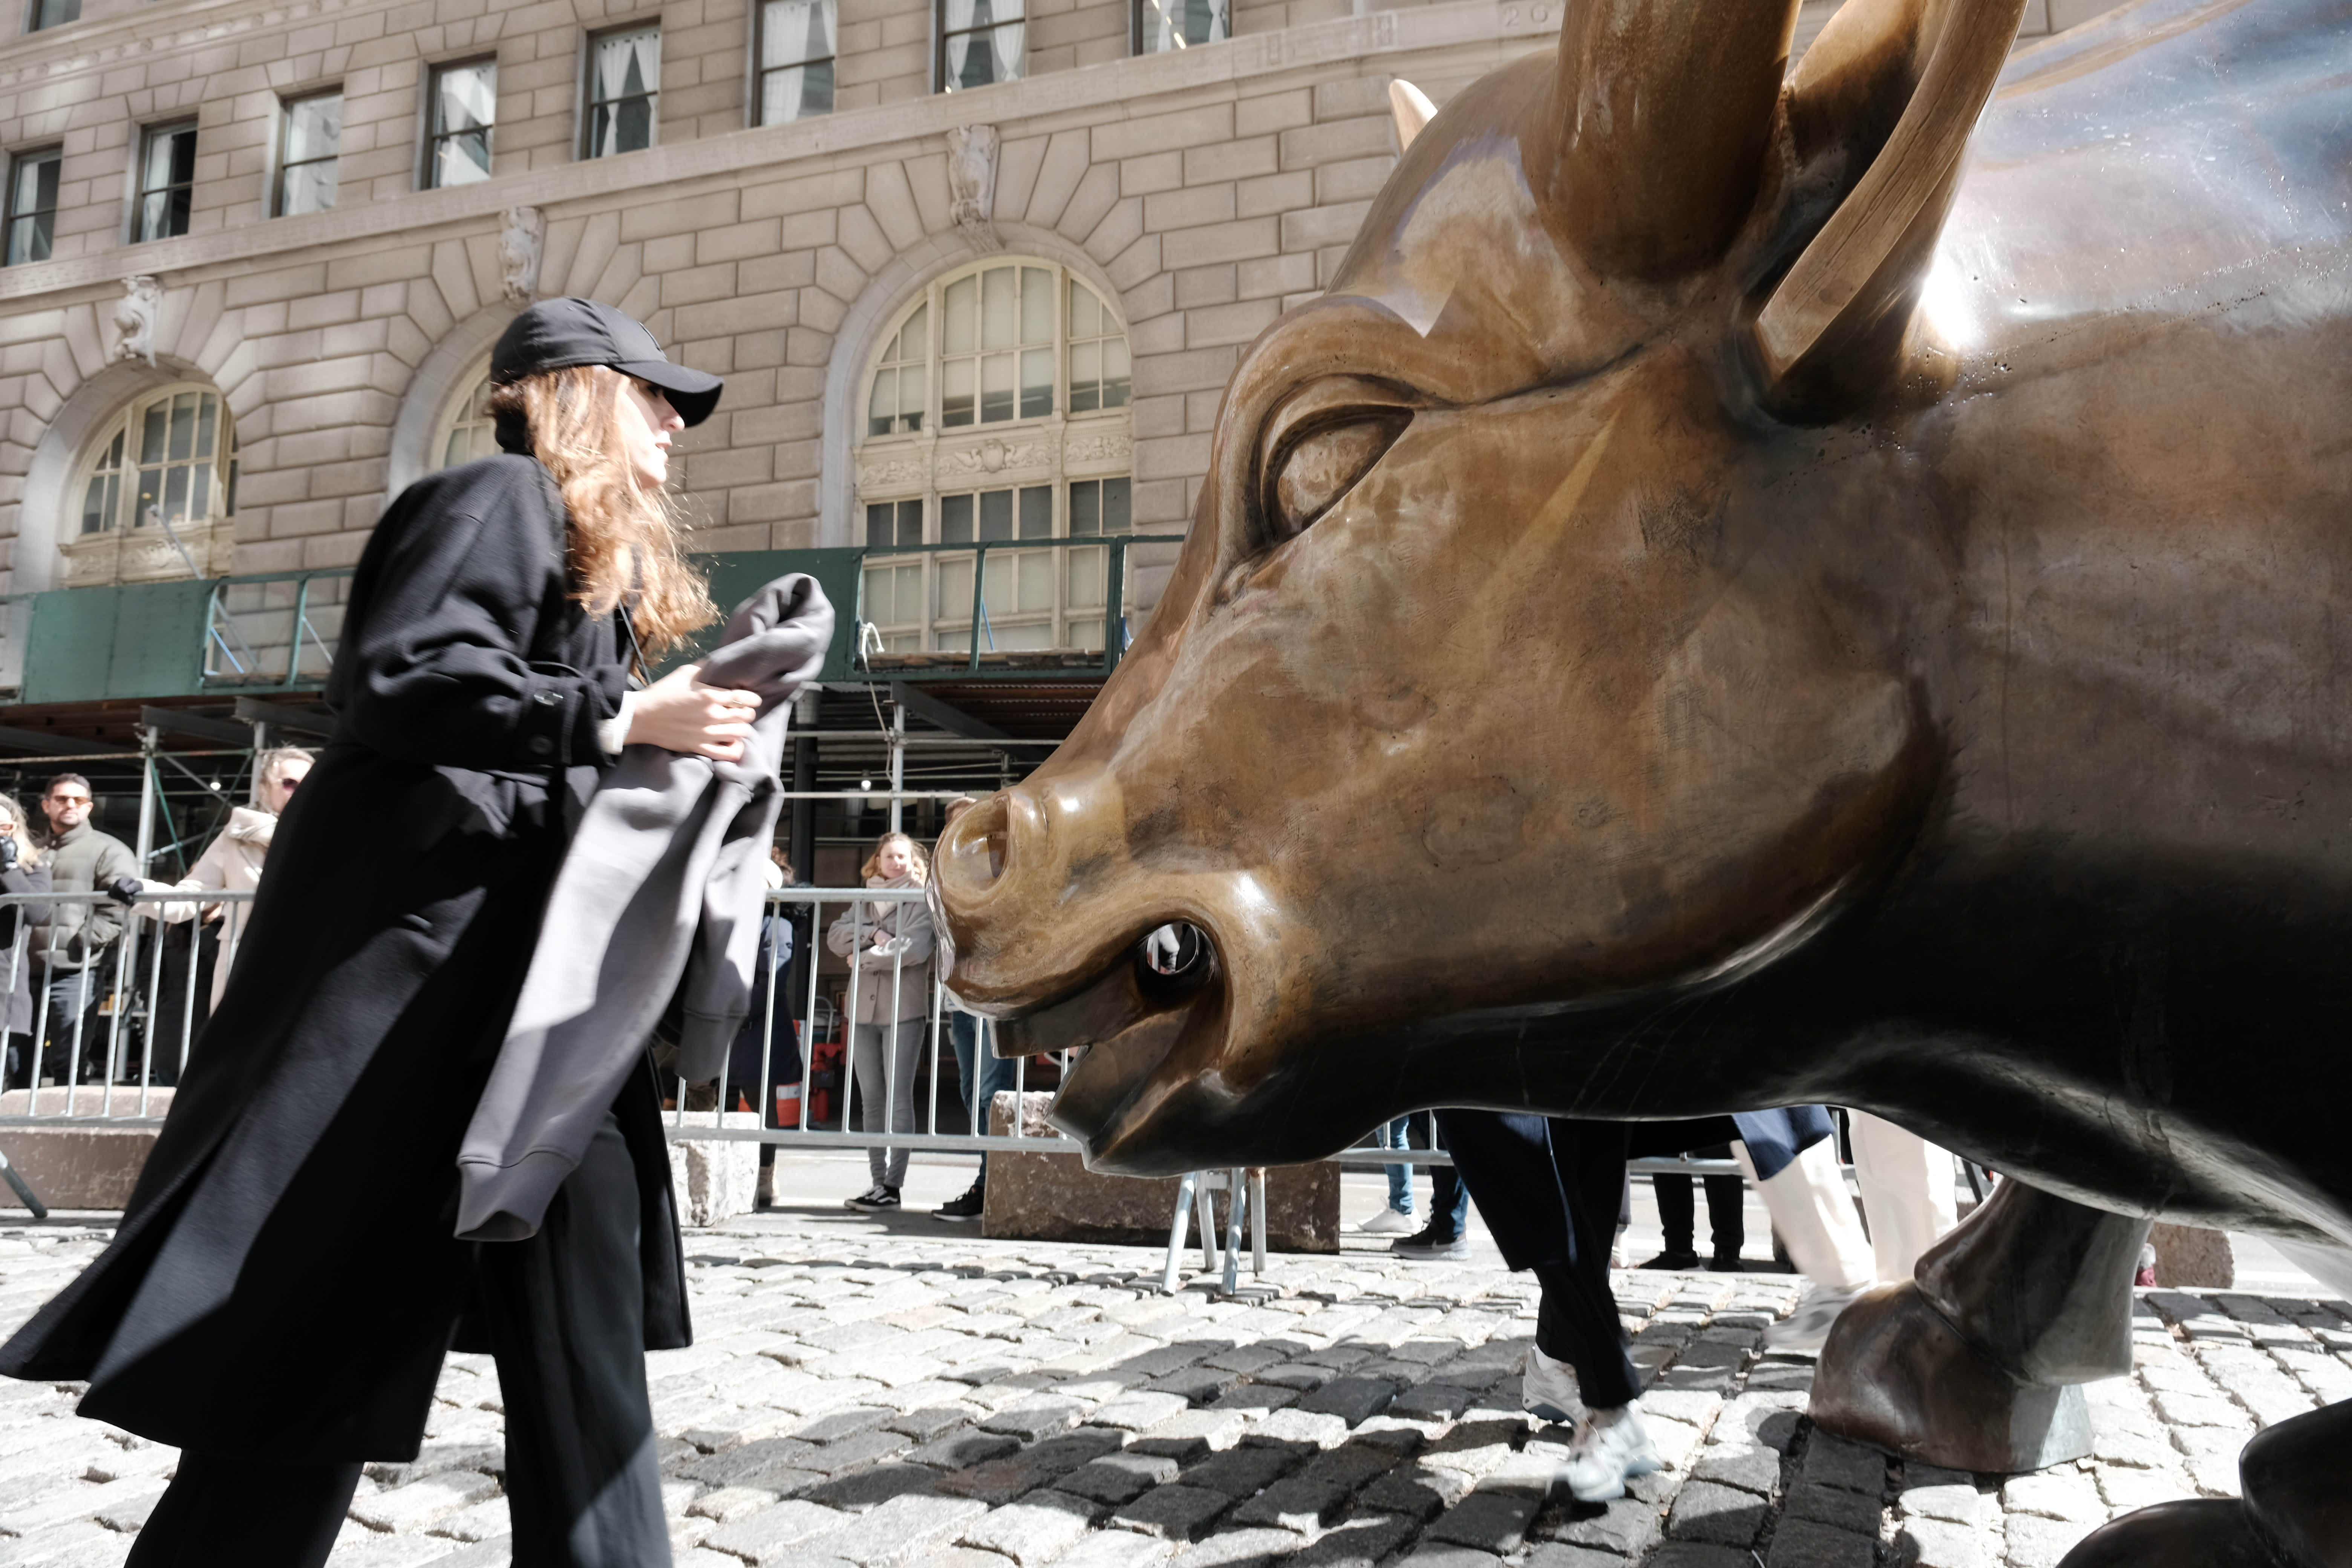 The S&P climbs into bull market territory, with the Fed back in focus next week